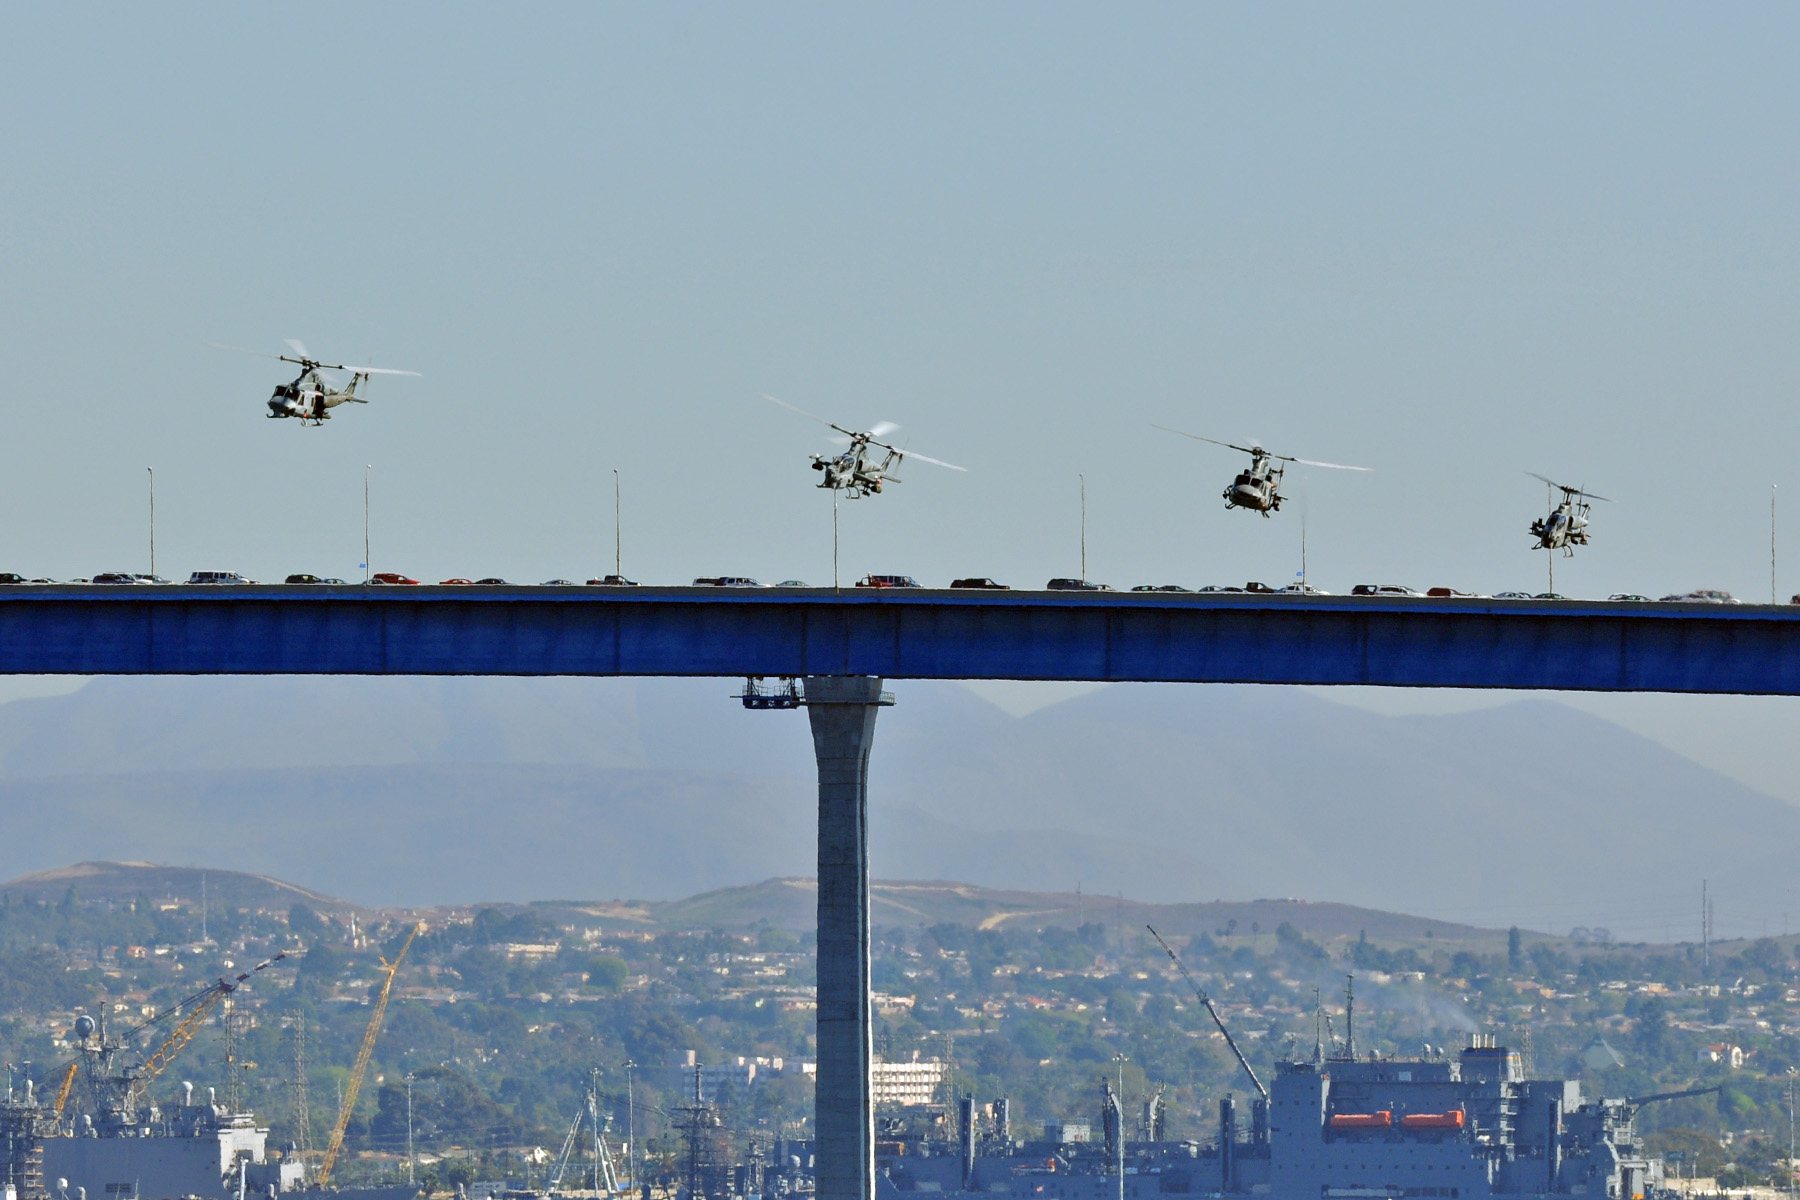 Helicopters over bridge - public use.jpg